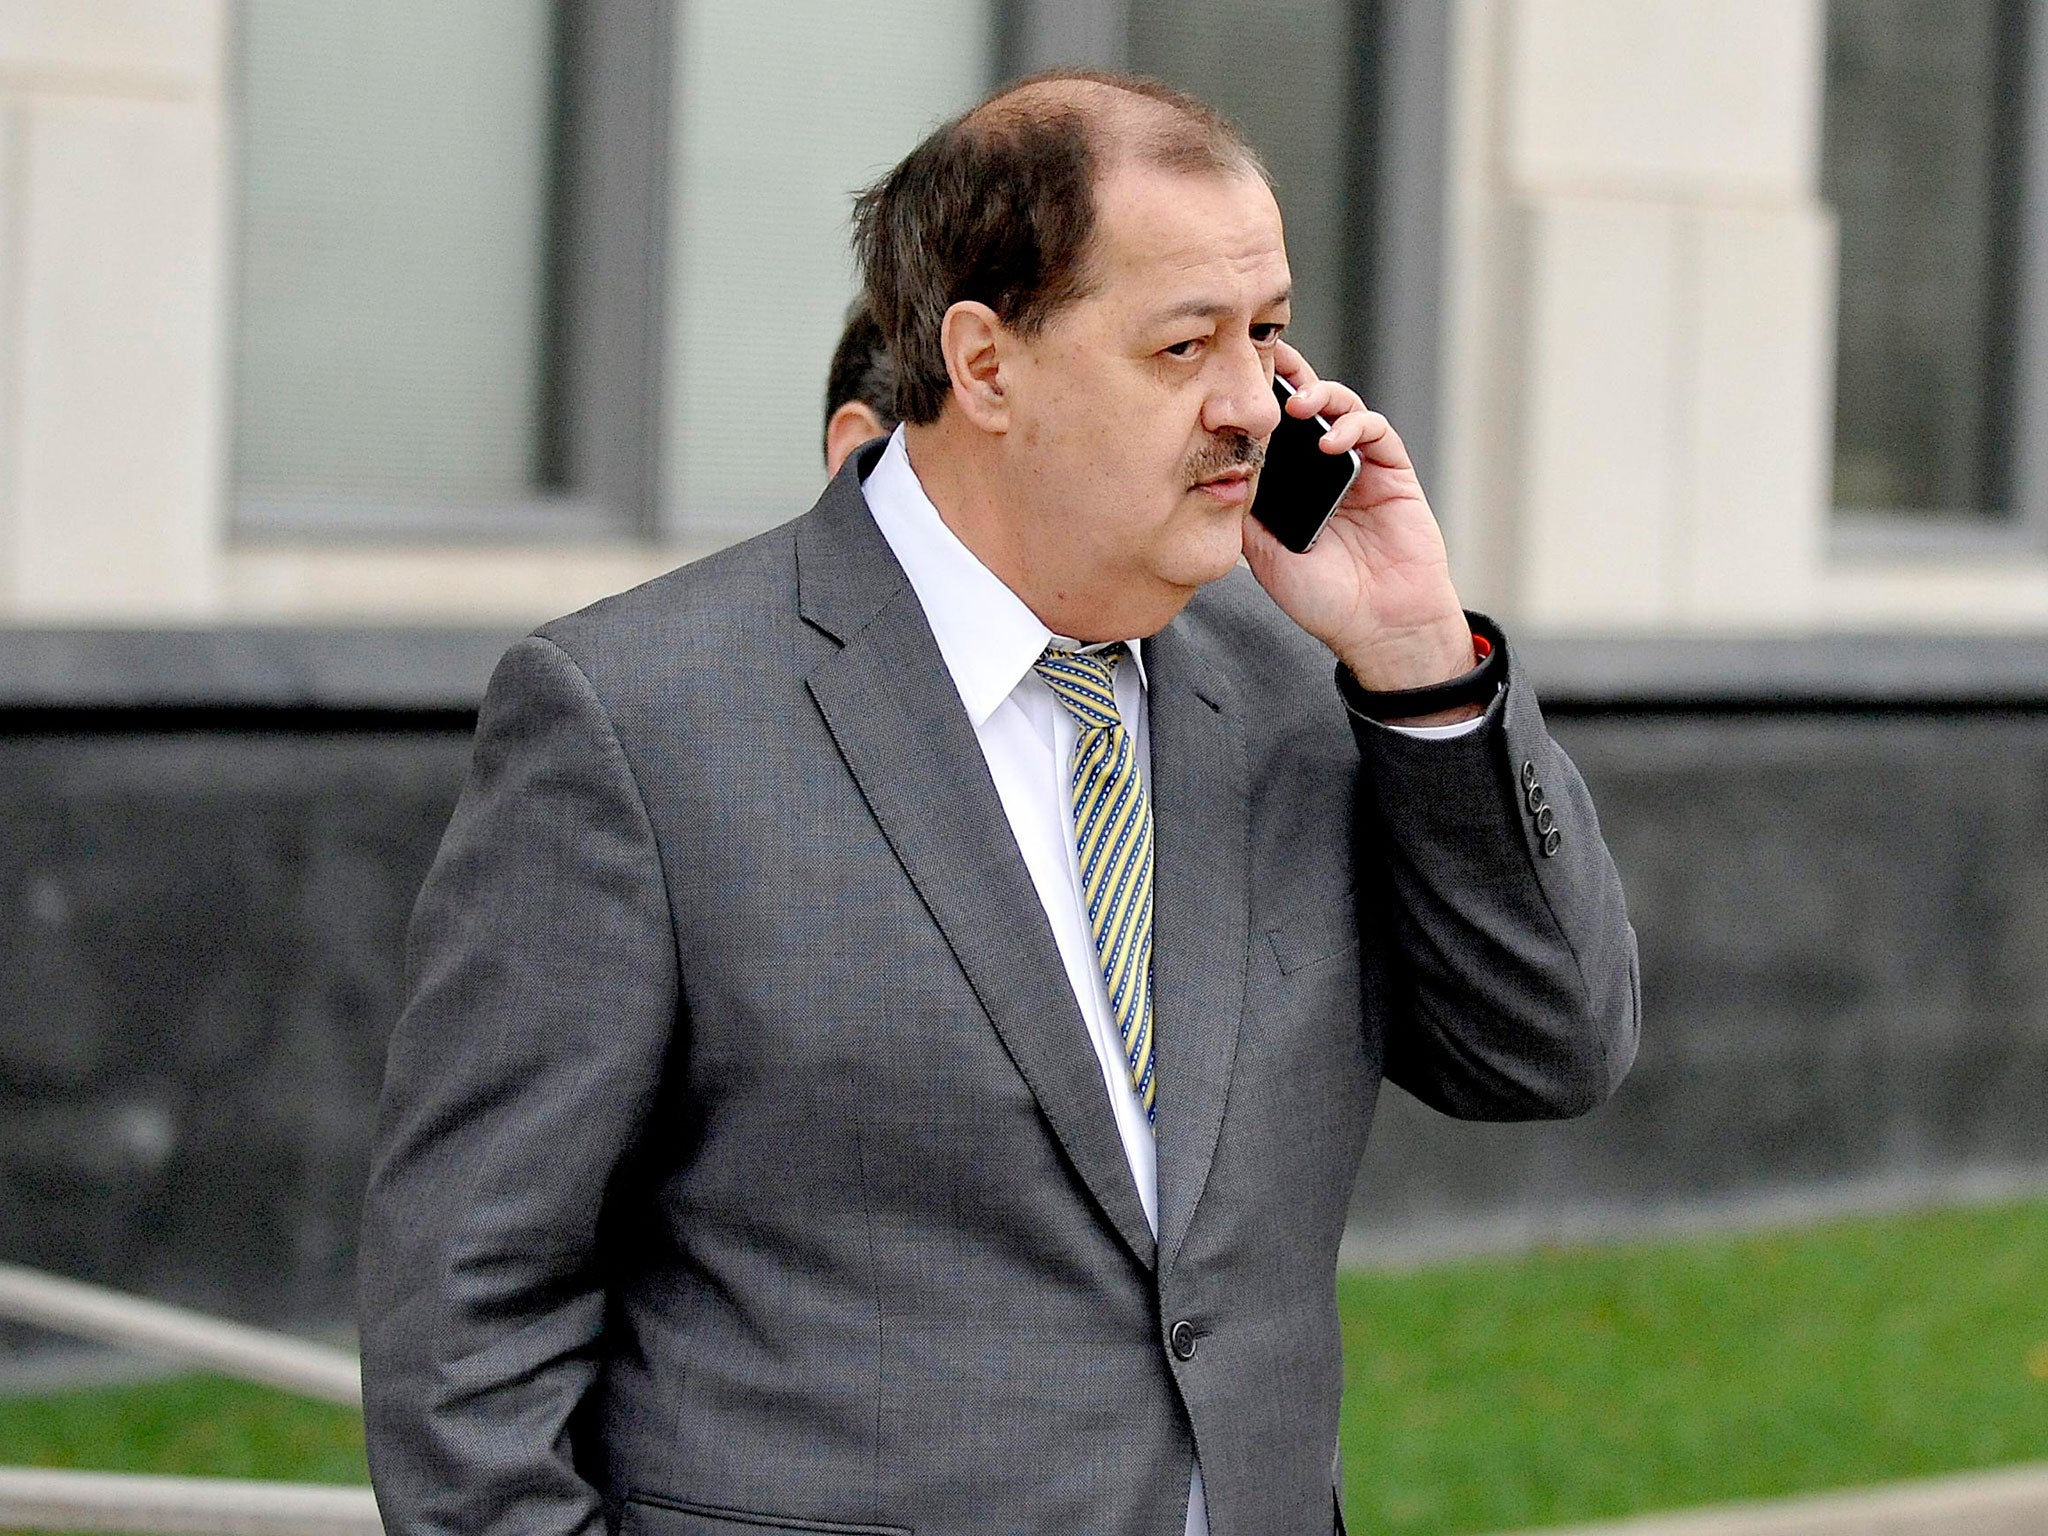 Former Massey Energy Chief Executive Don Blankenship as he walks into the Robert C. Byrd U.S. Courthouse in Charleston, West Virginia